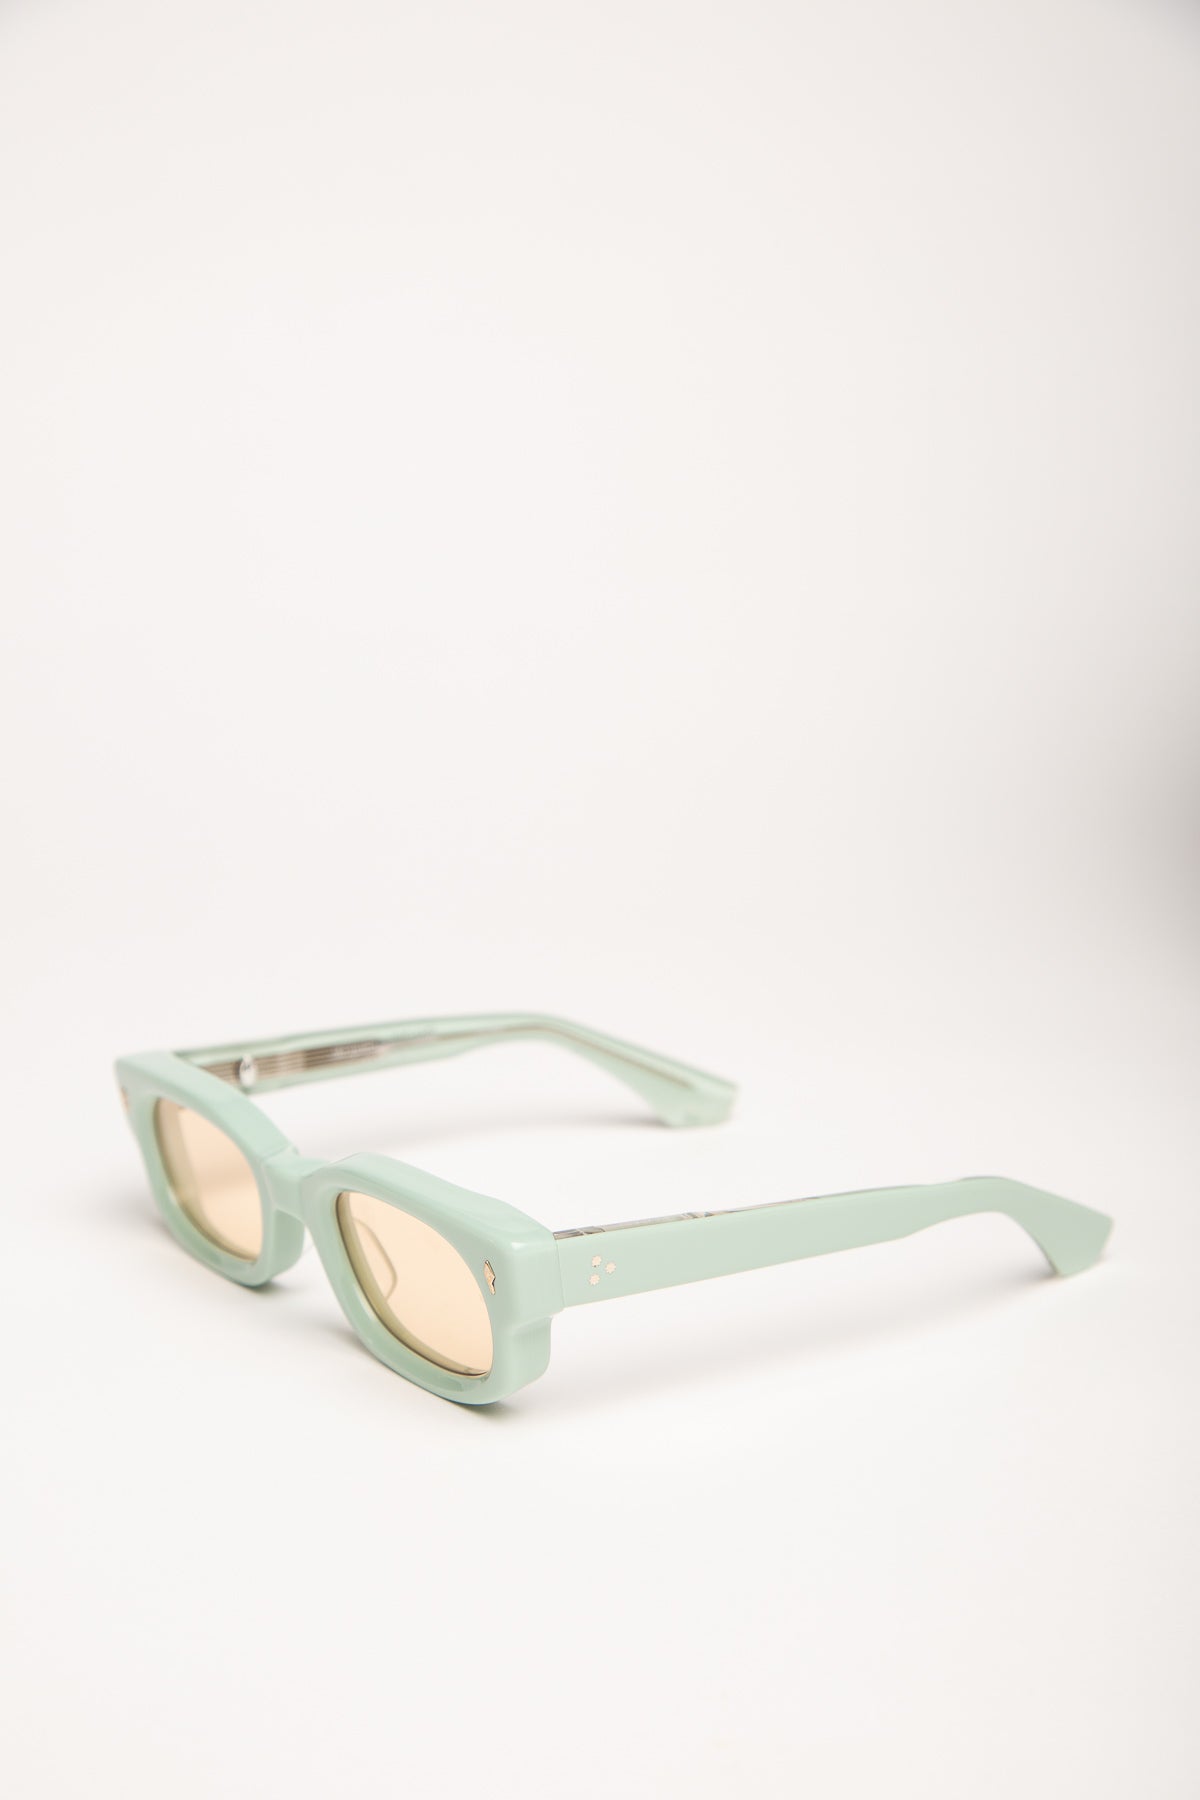 JACQUES MARIE MAGE | WHISKEYCLONE SUNGLASSES IN GLACIER